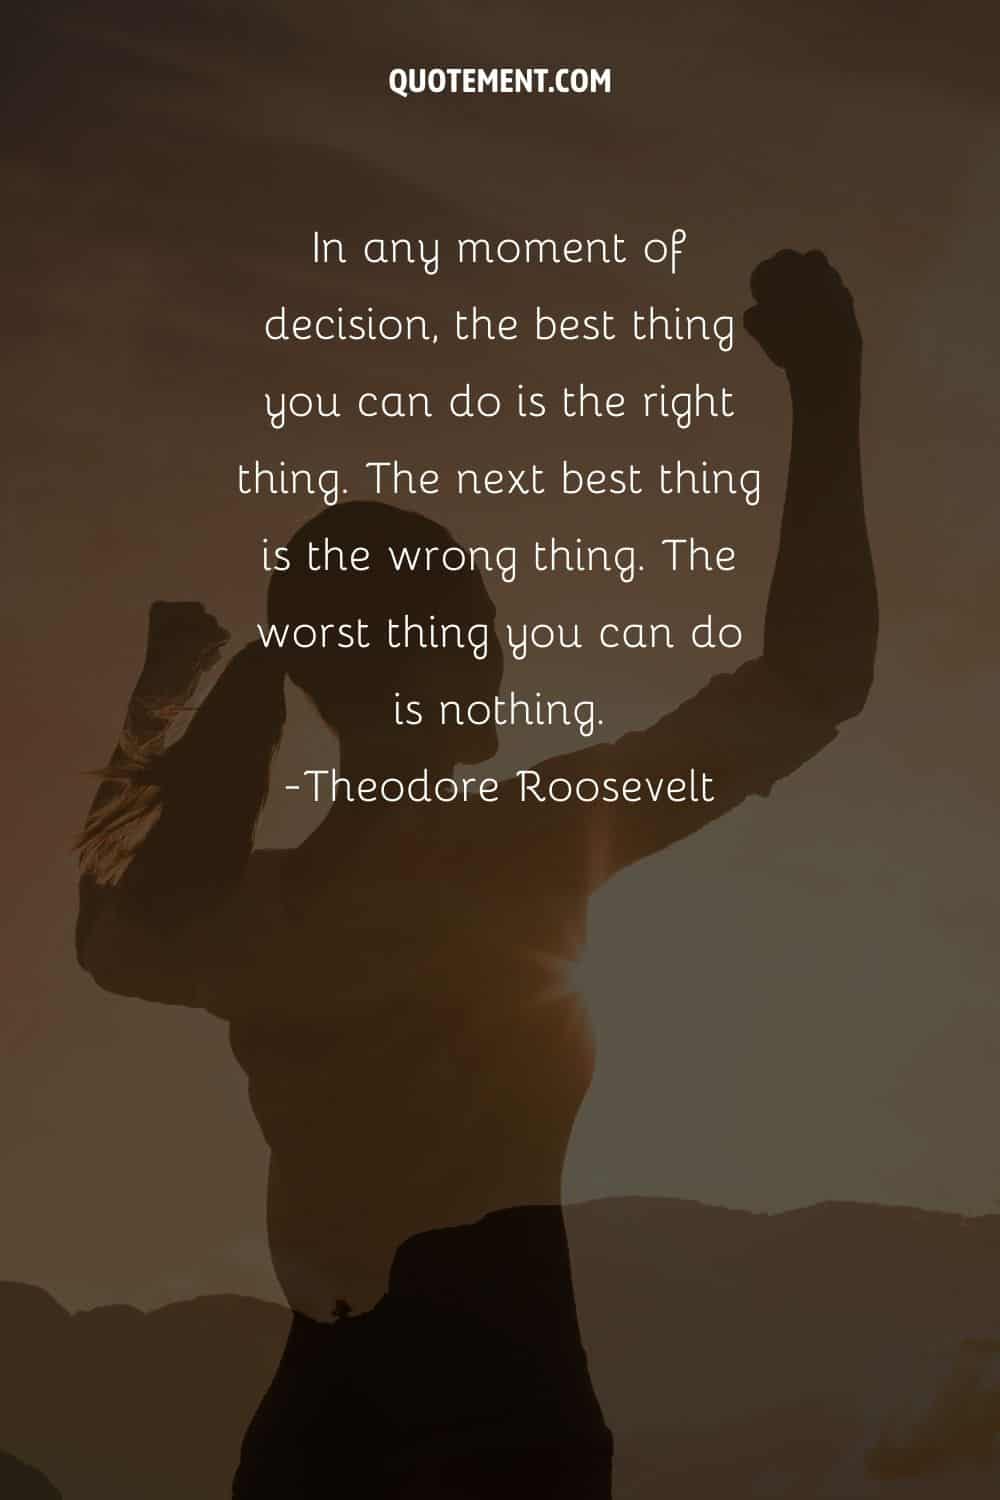 In any moment of decision, the best thing you can do is the right thing